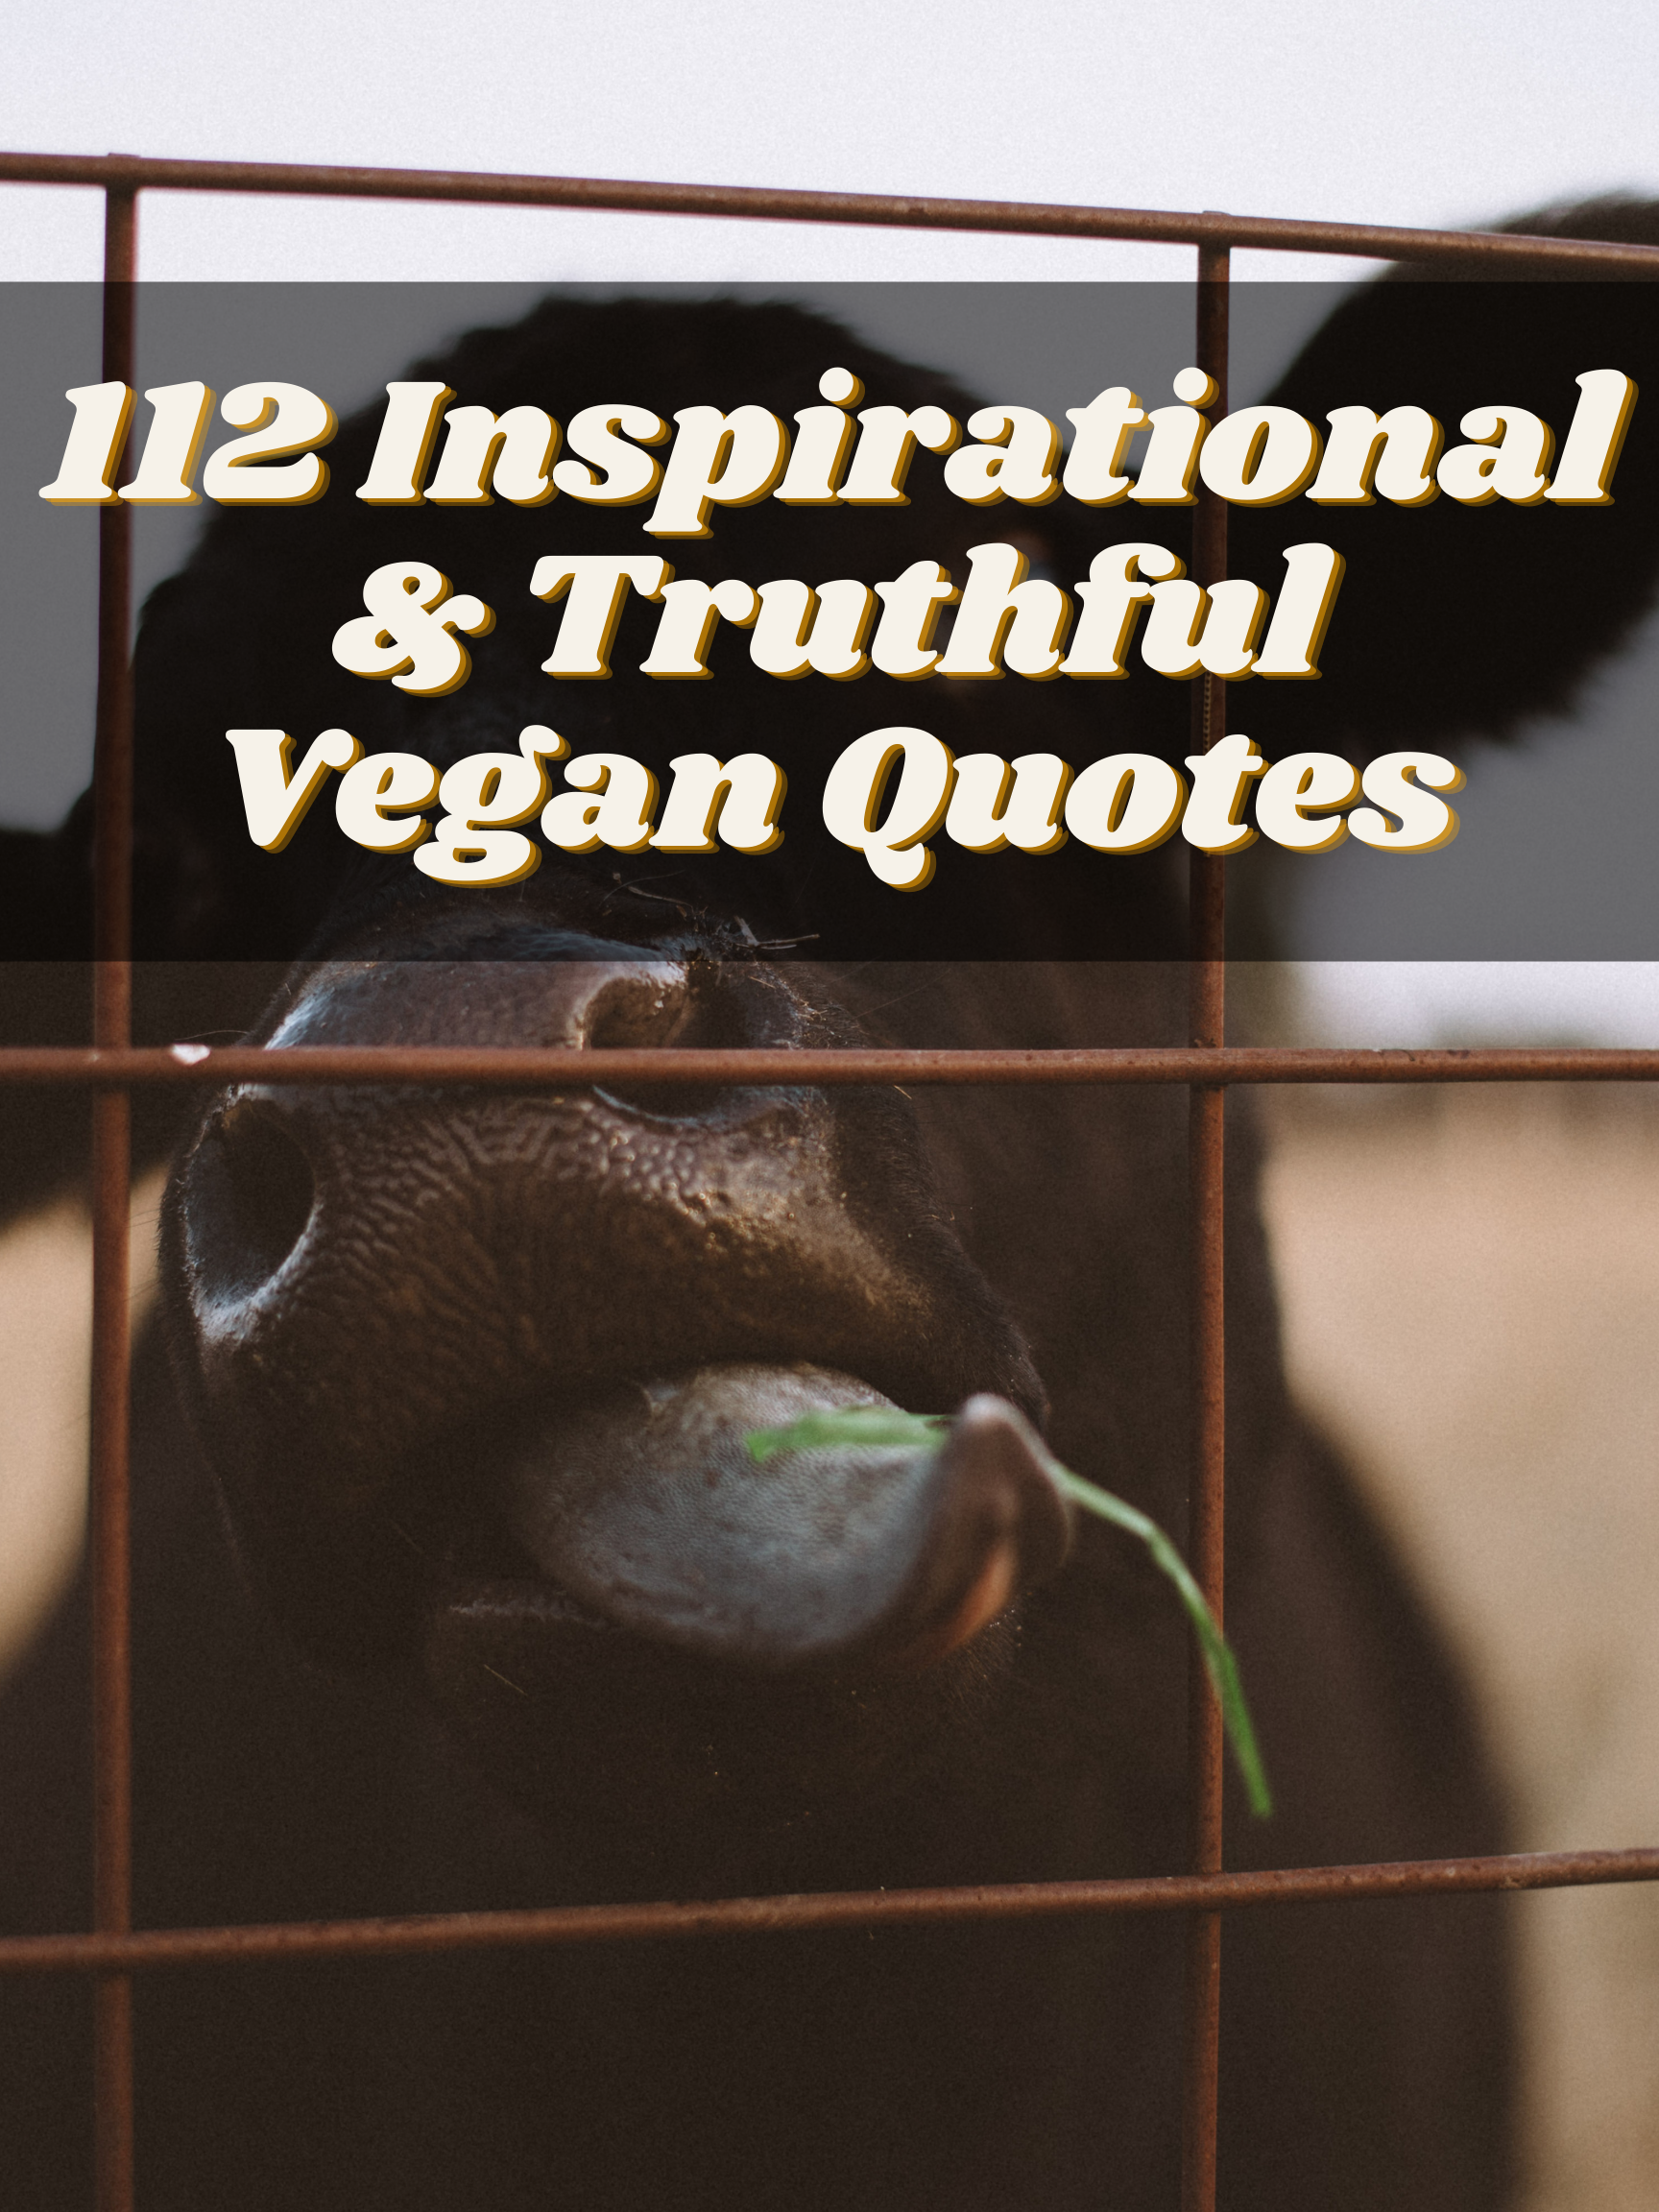 112 Inspirational + Truthful Vegan Quotes | The Friendly Fig